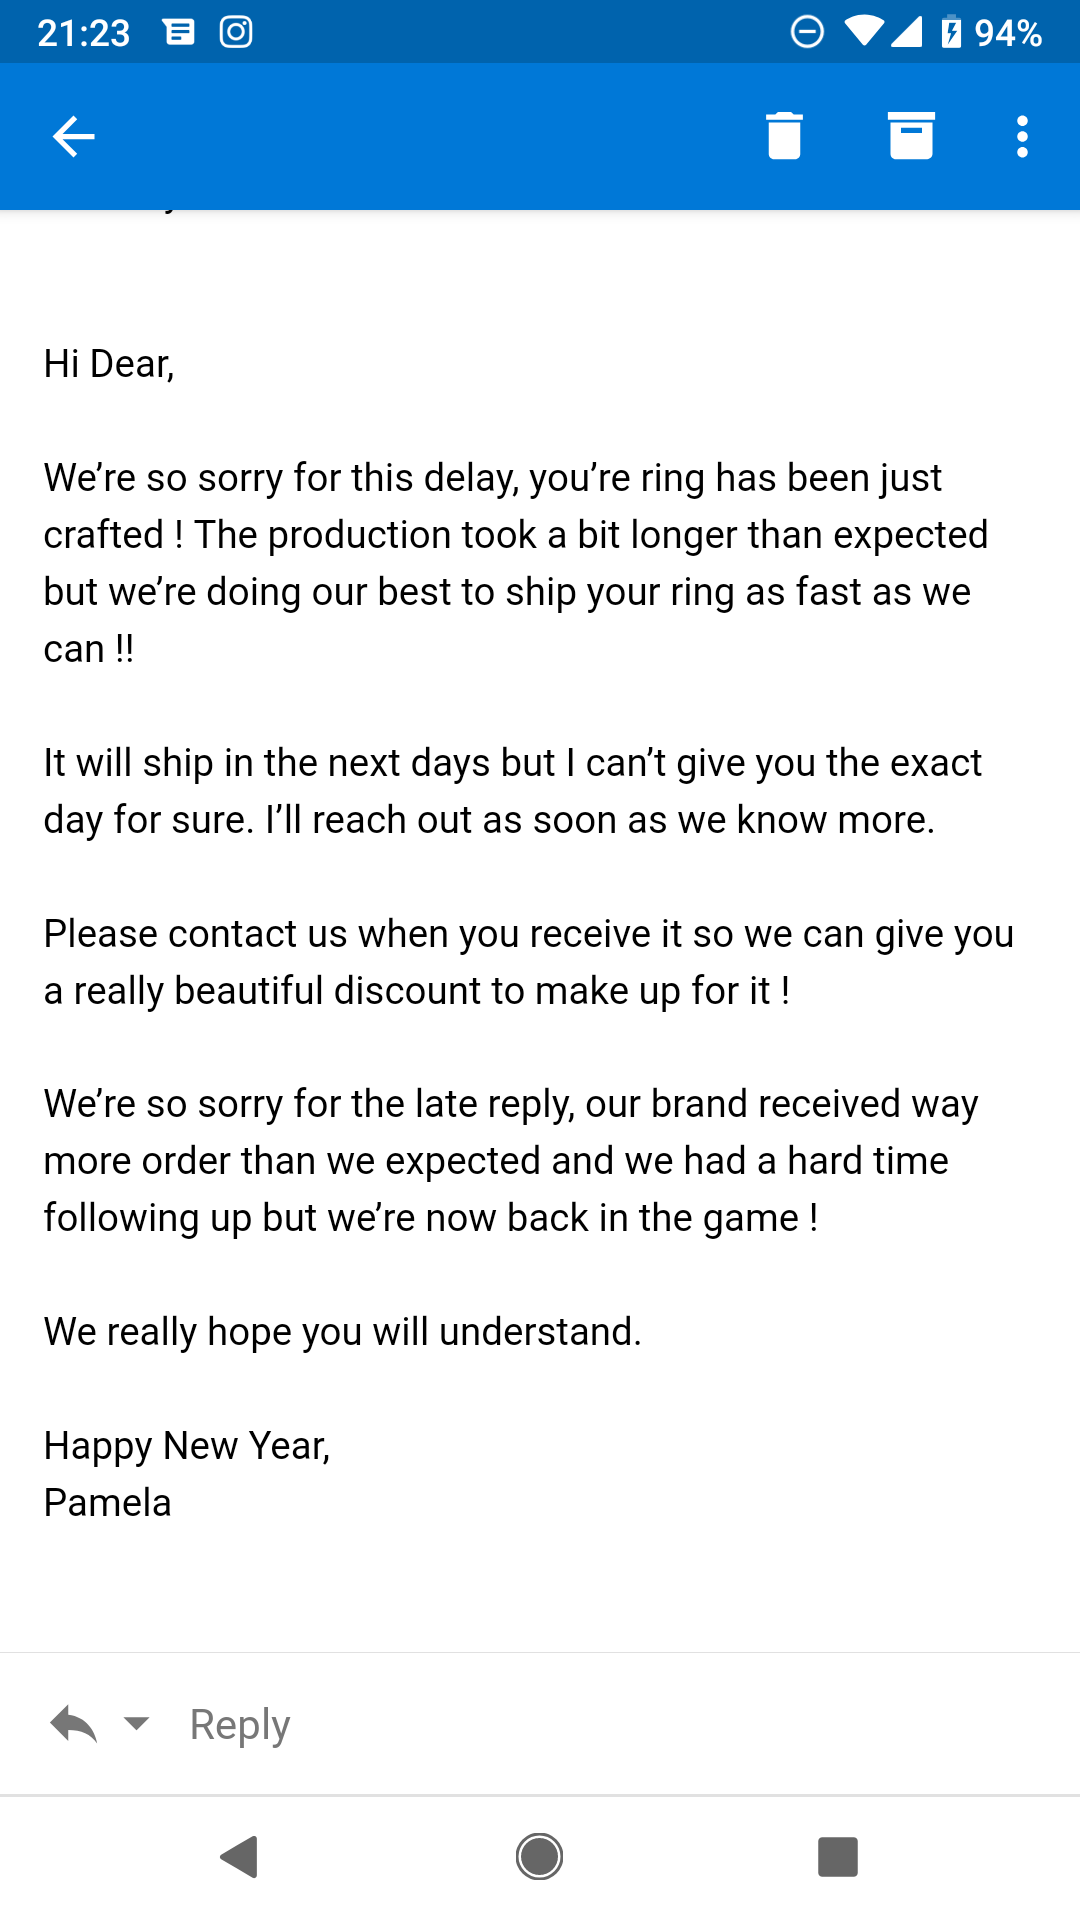 Only reply received from the company on January 21